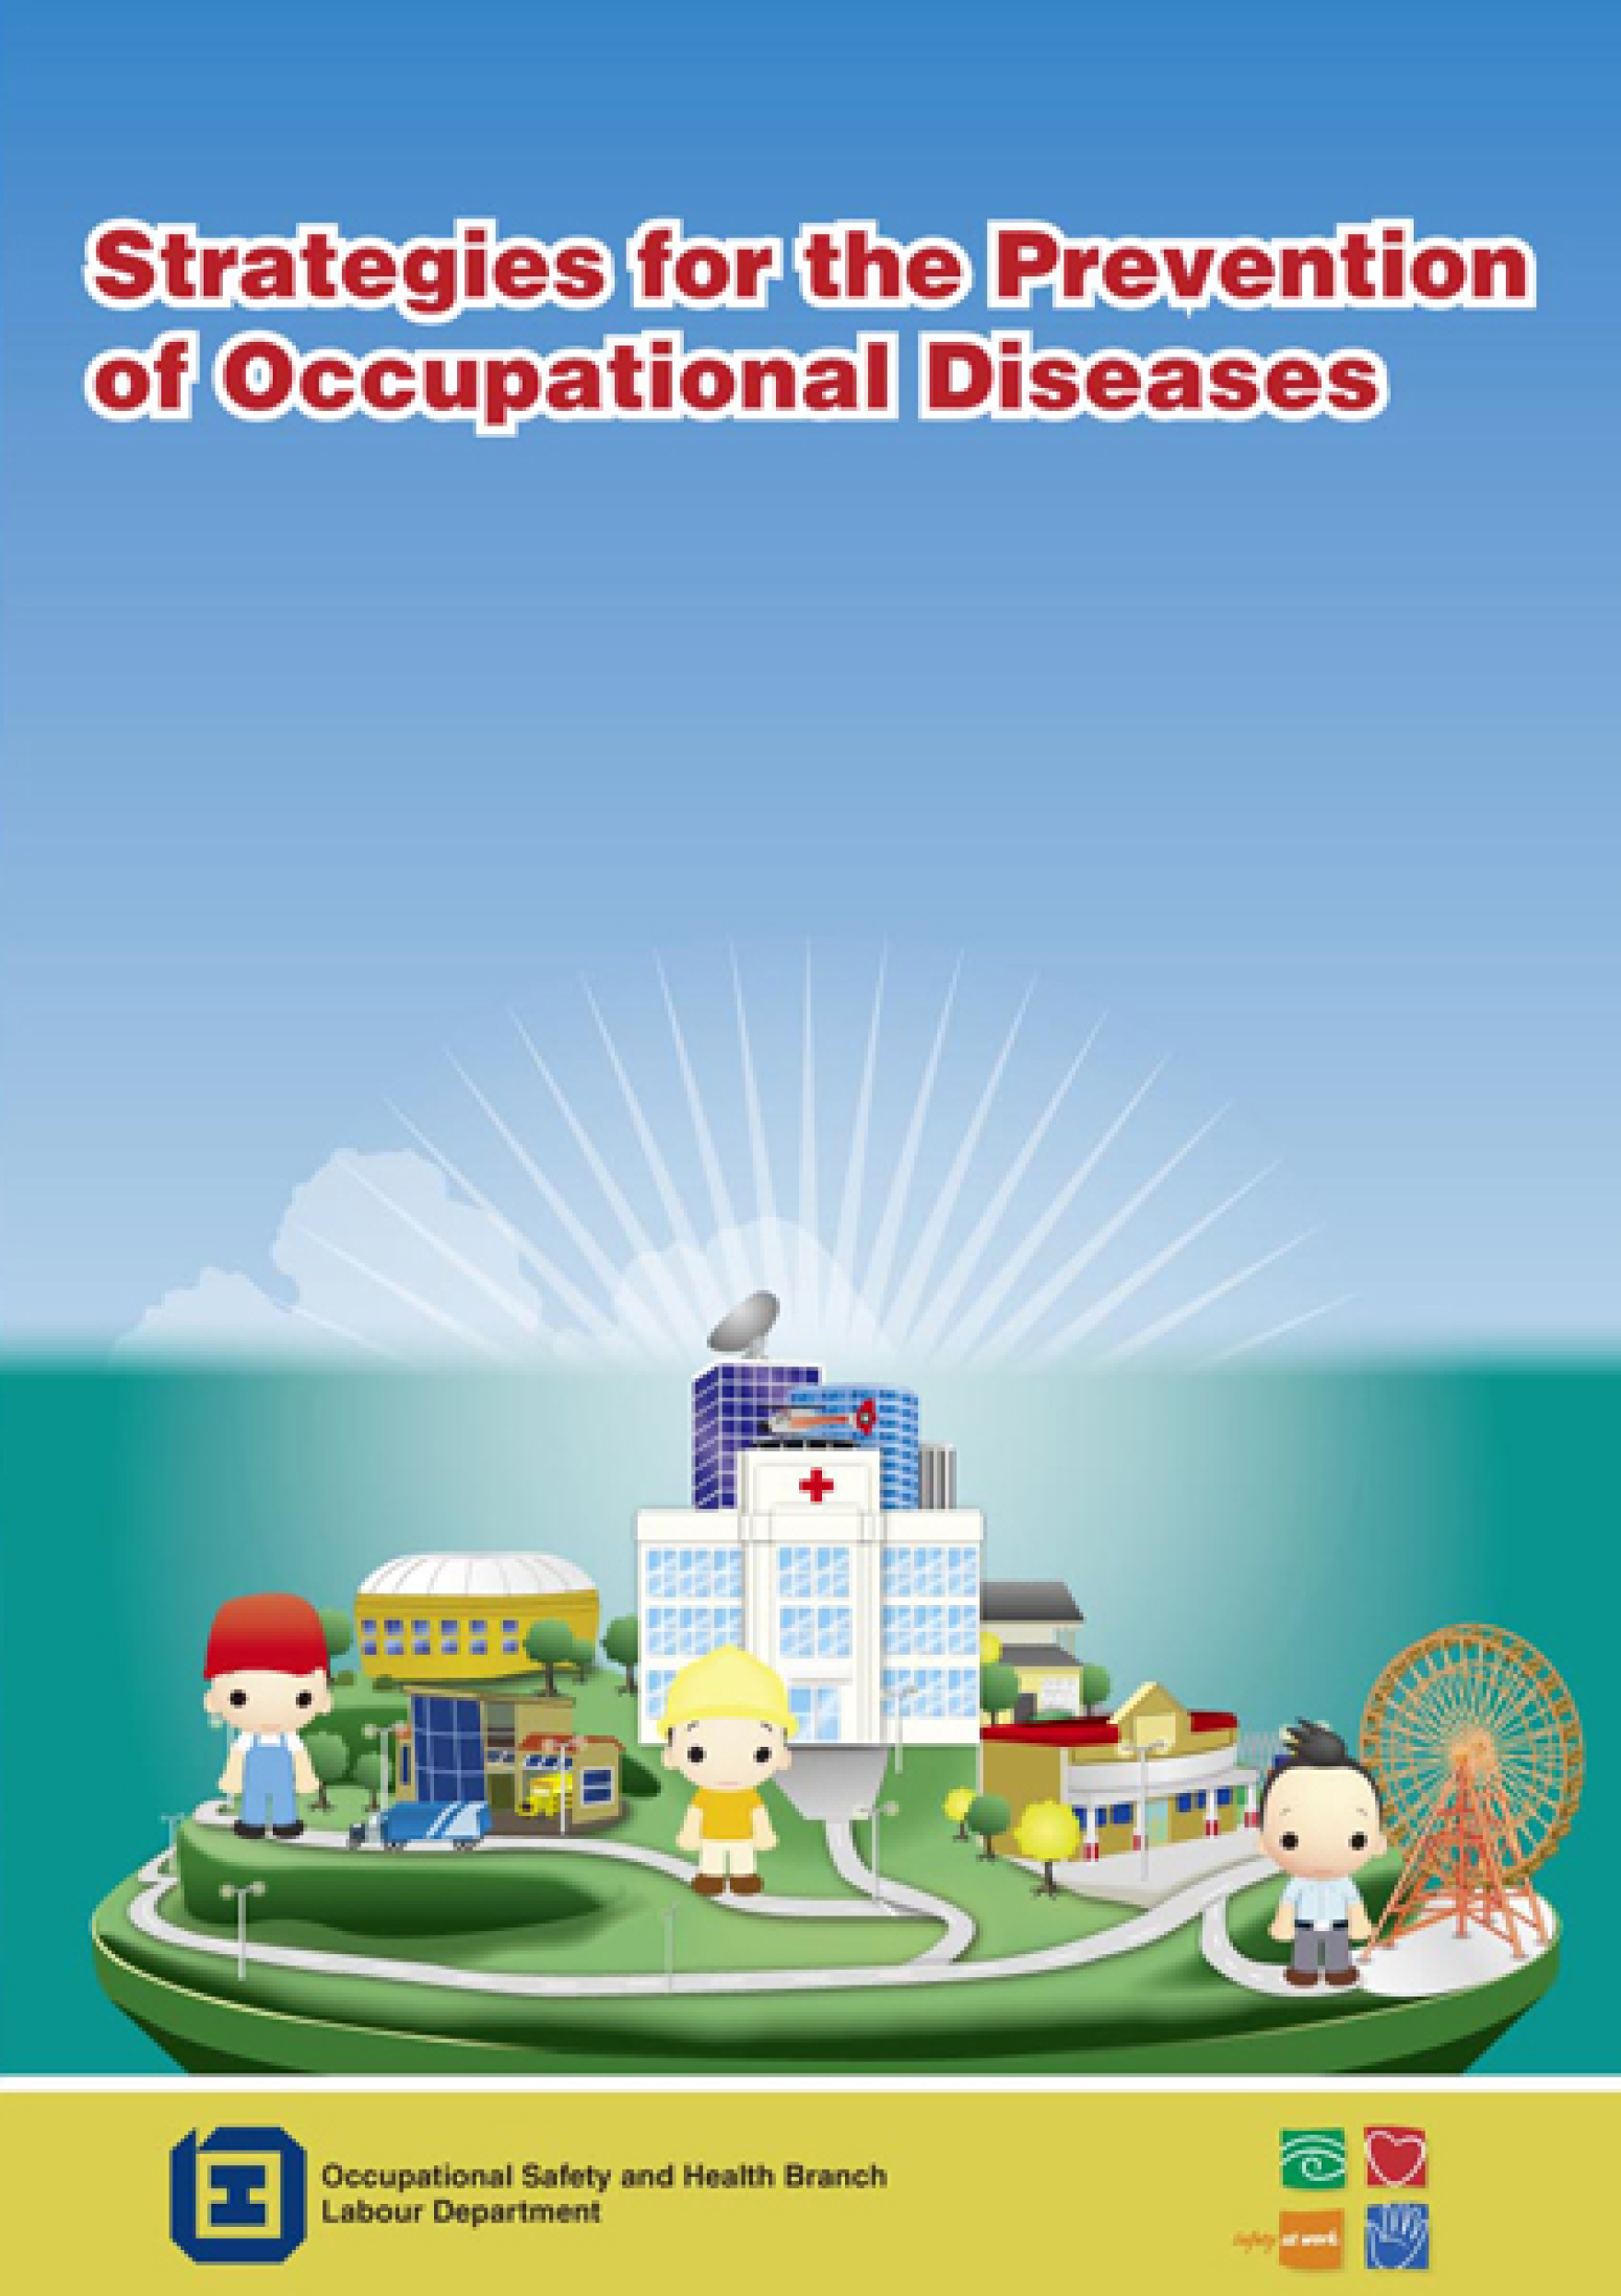 Strategies for the Prevention of Occupational Diseases(published by the Labour Department)